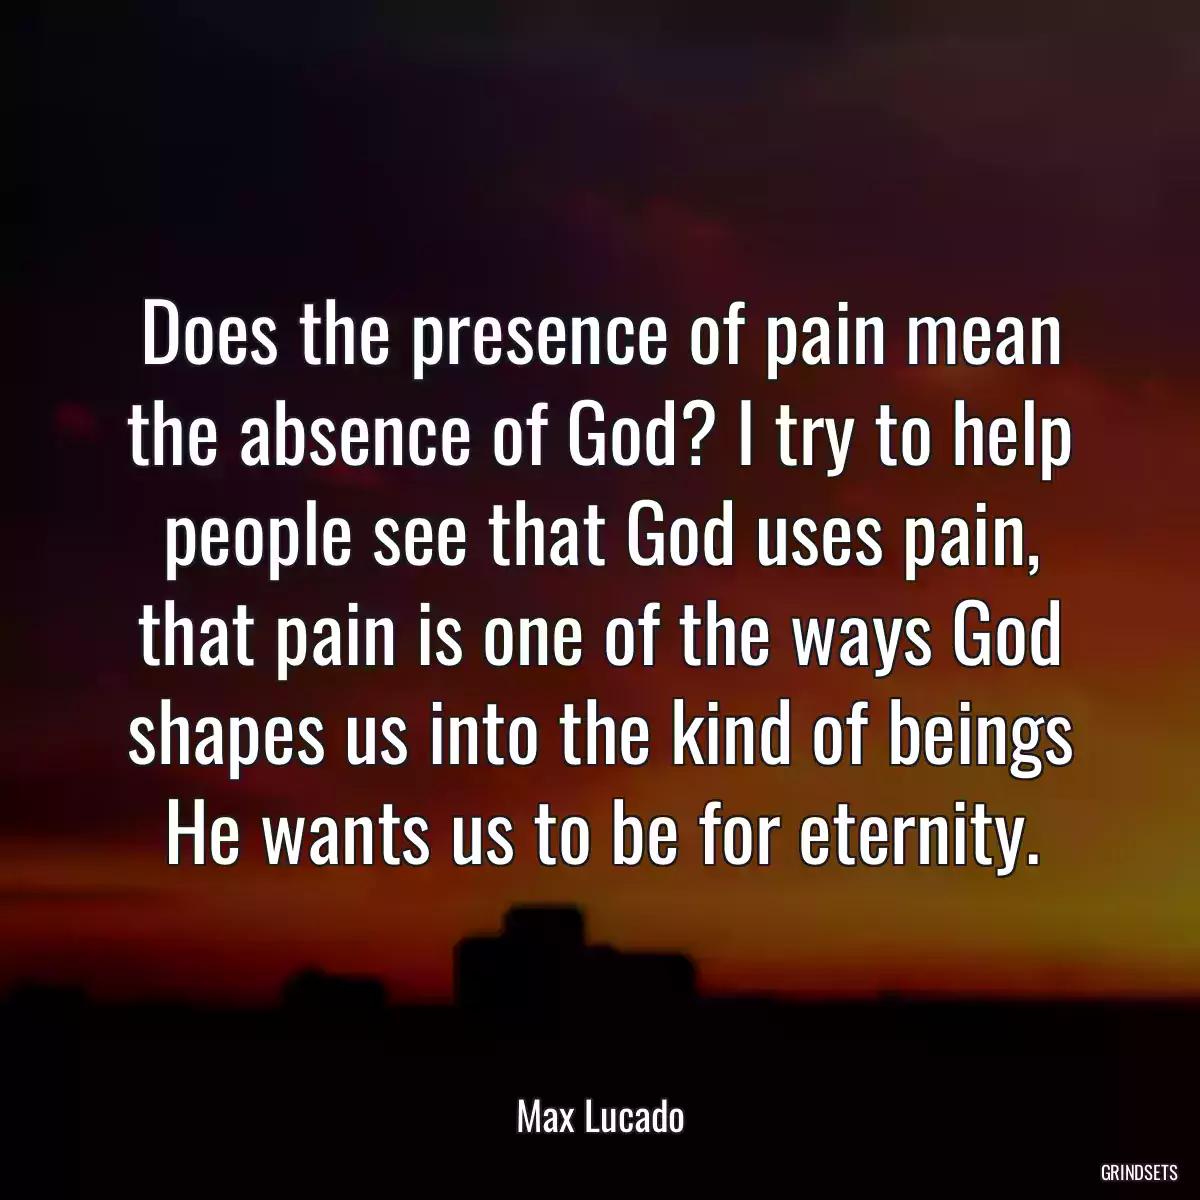 Does the presence of pain mean the absence of God? I try to help people see that God uses pain, that pain is one of the ways God shapes us into the kind of beings He wants us to be for eternity.